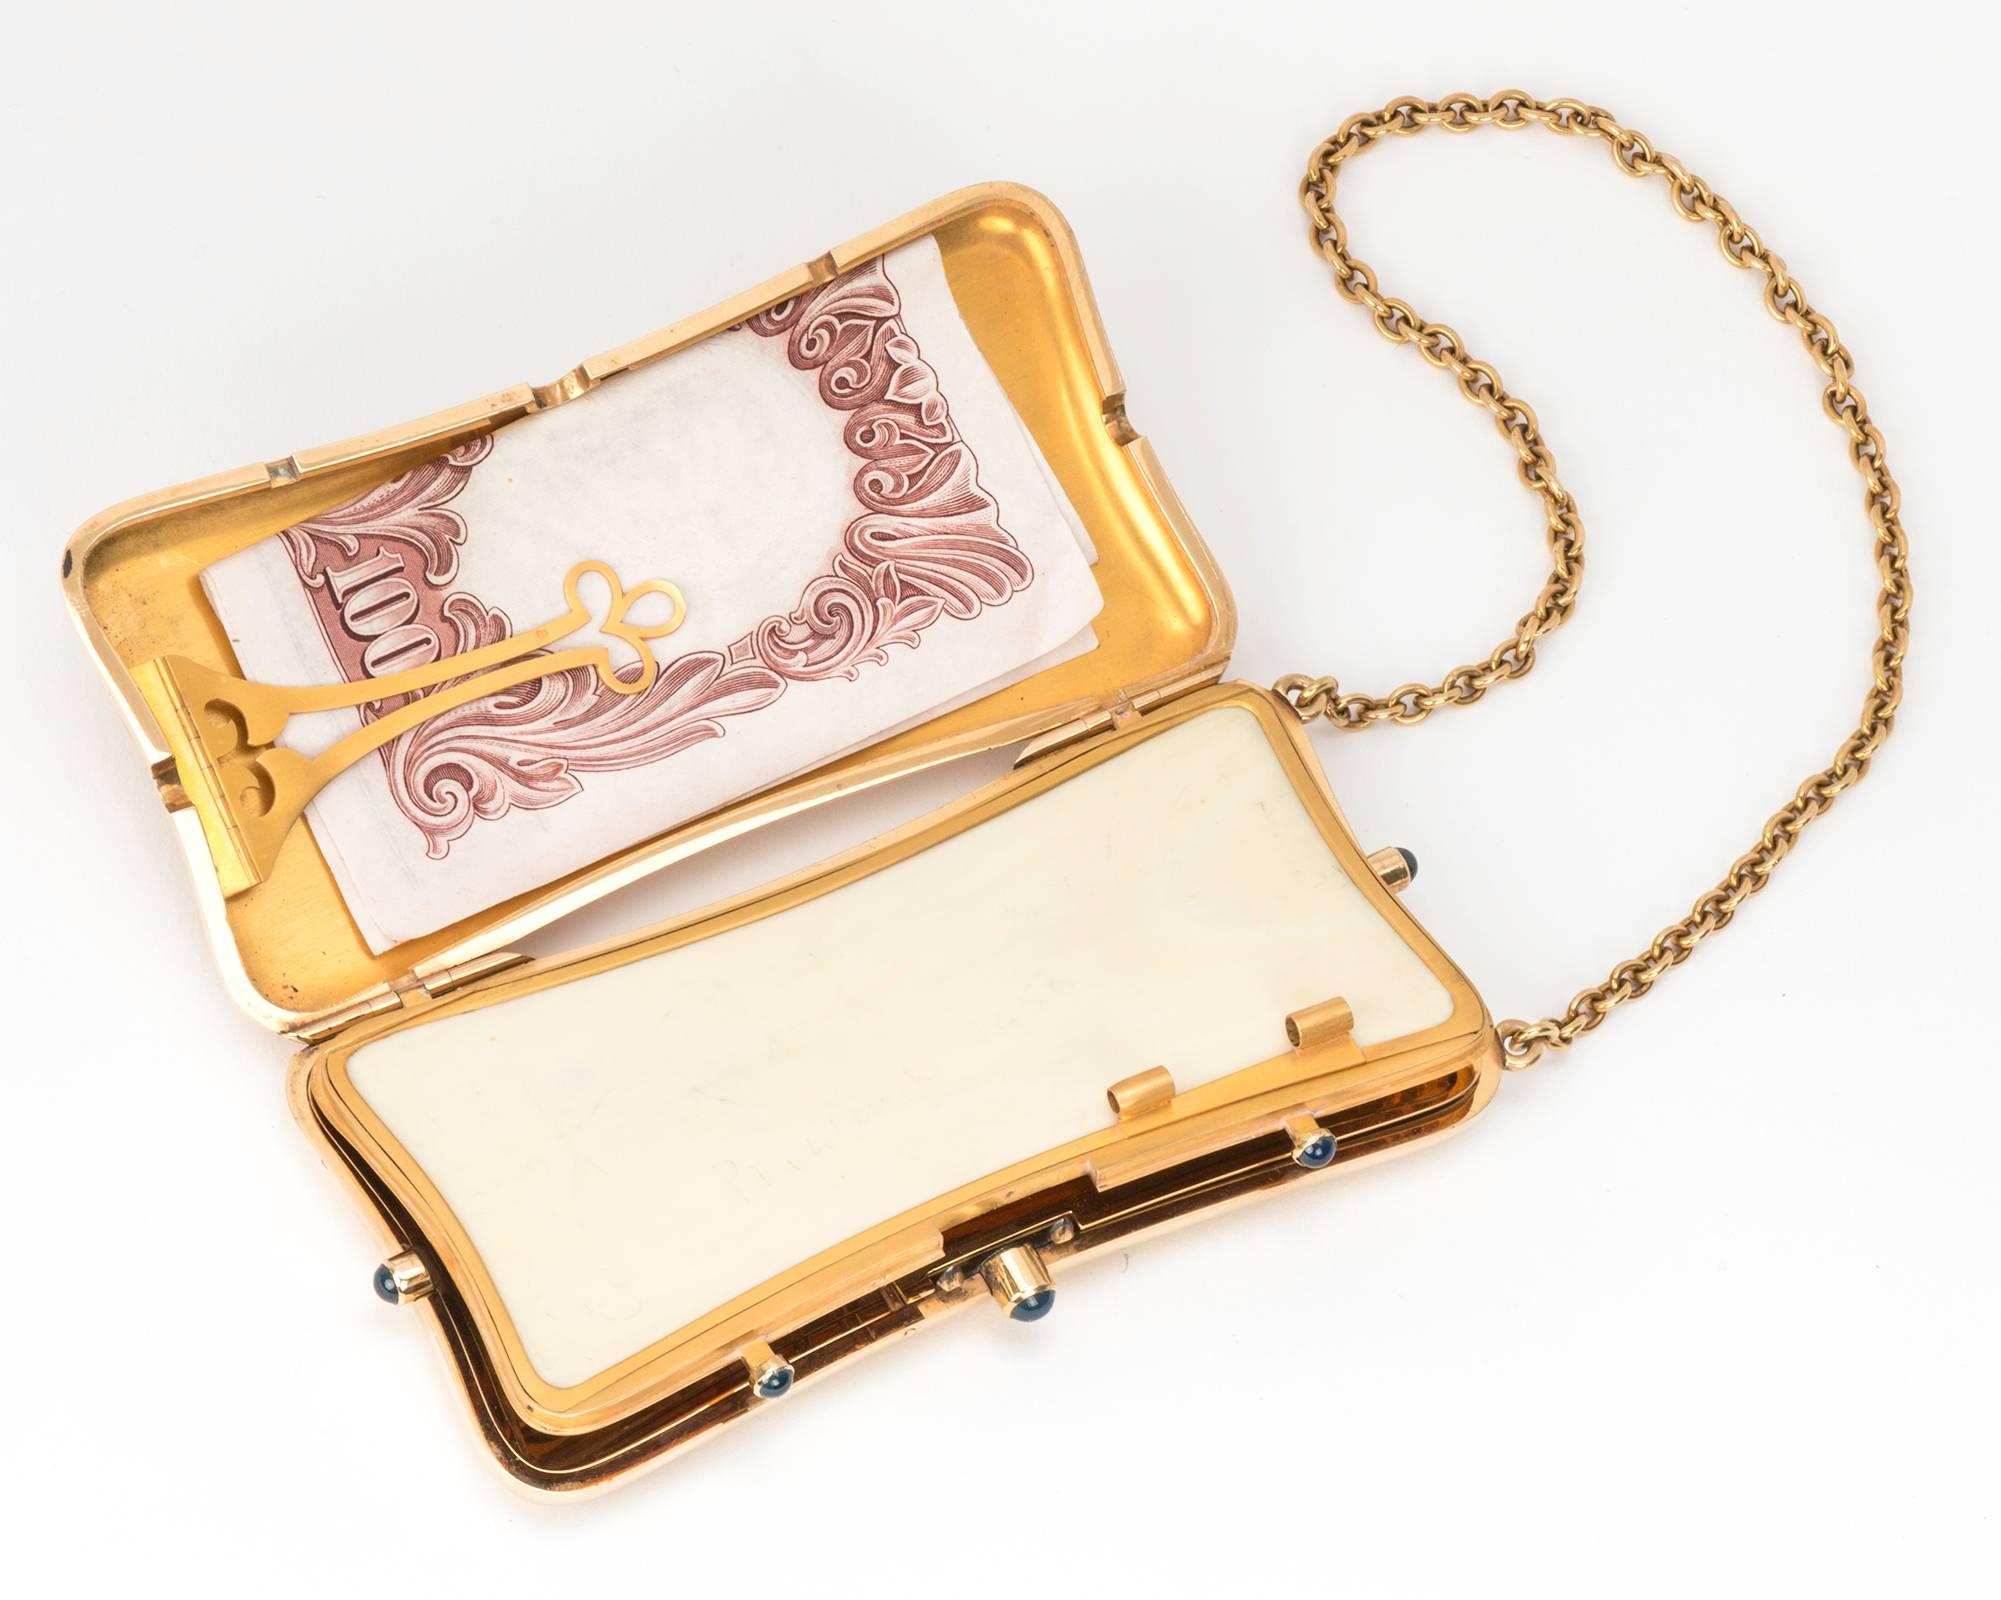 19th Century, Lovely 18k yellow gold compact purse.   French hallmark, 